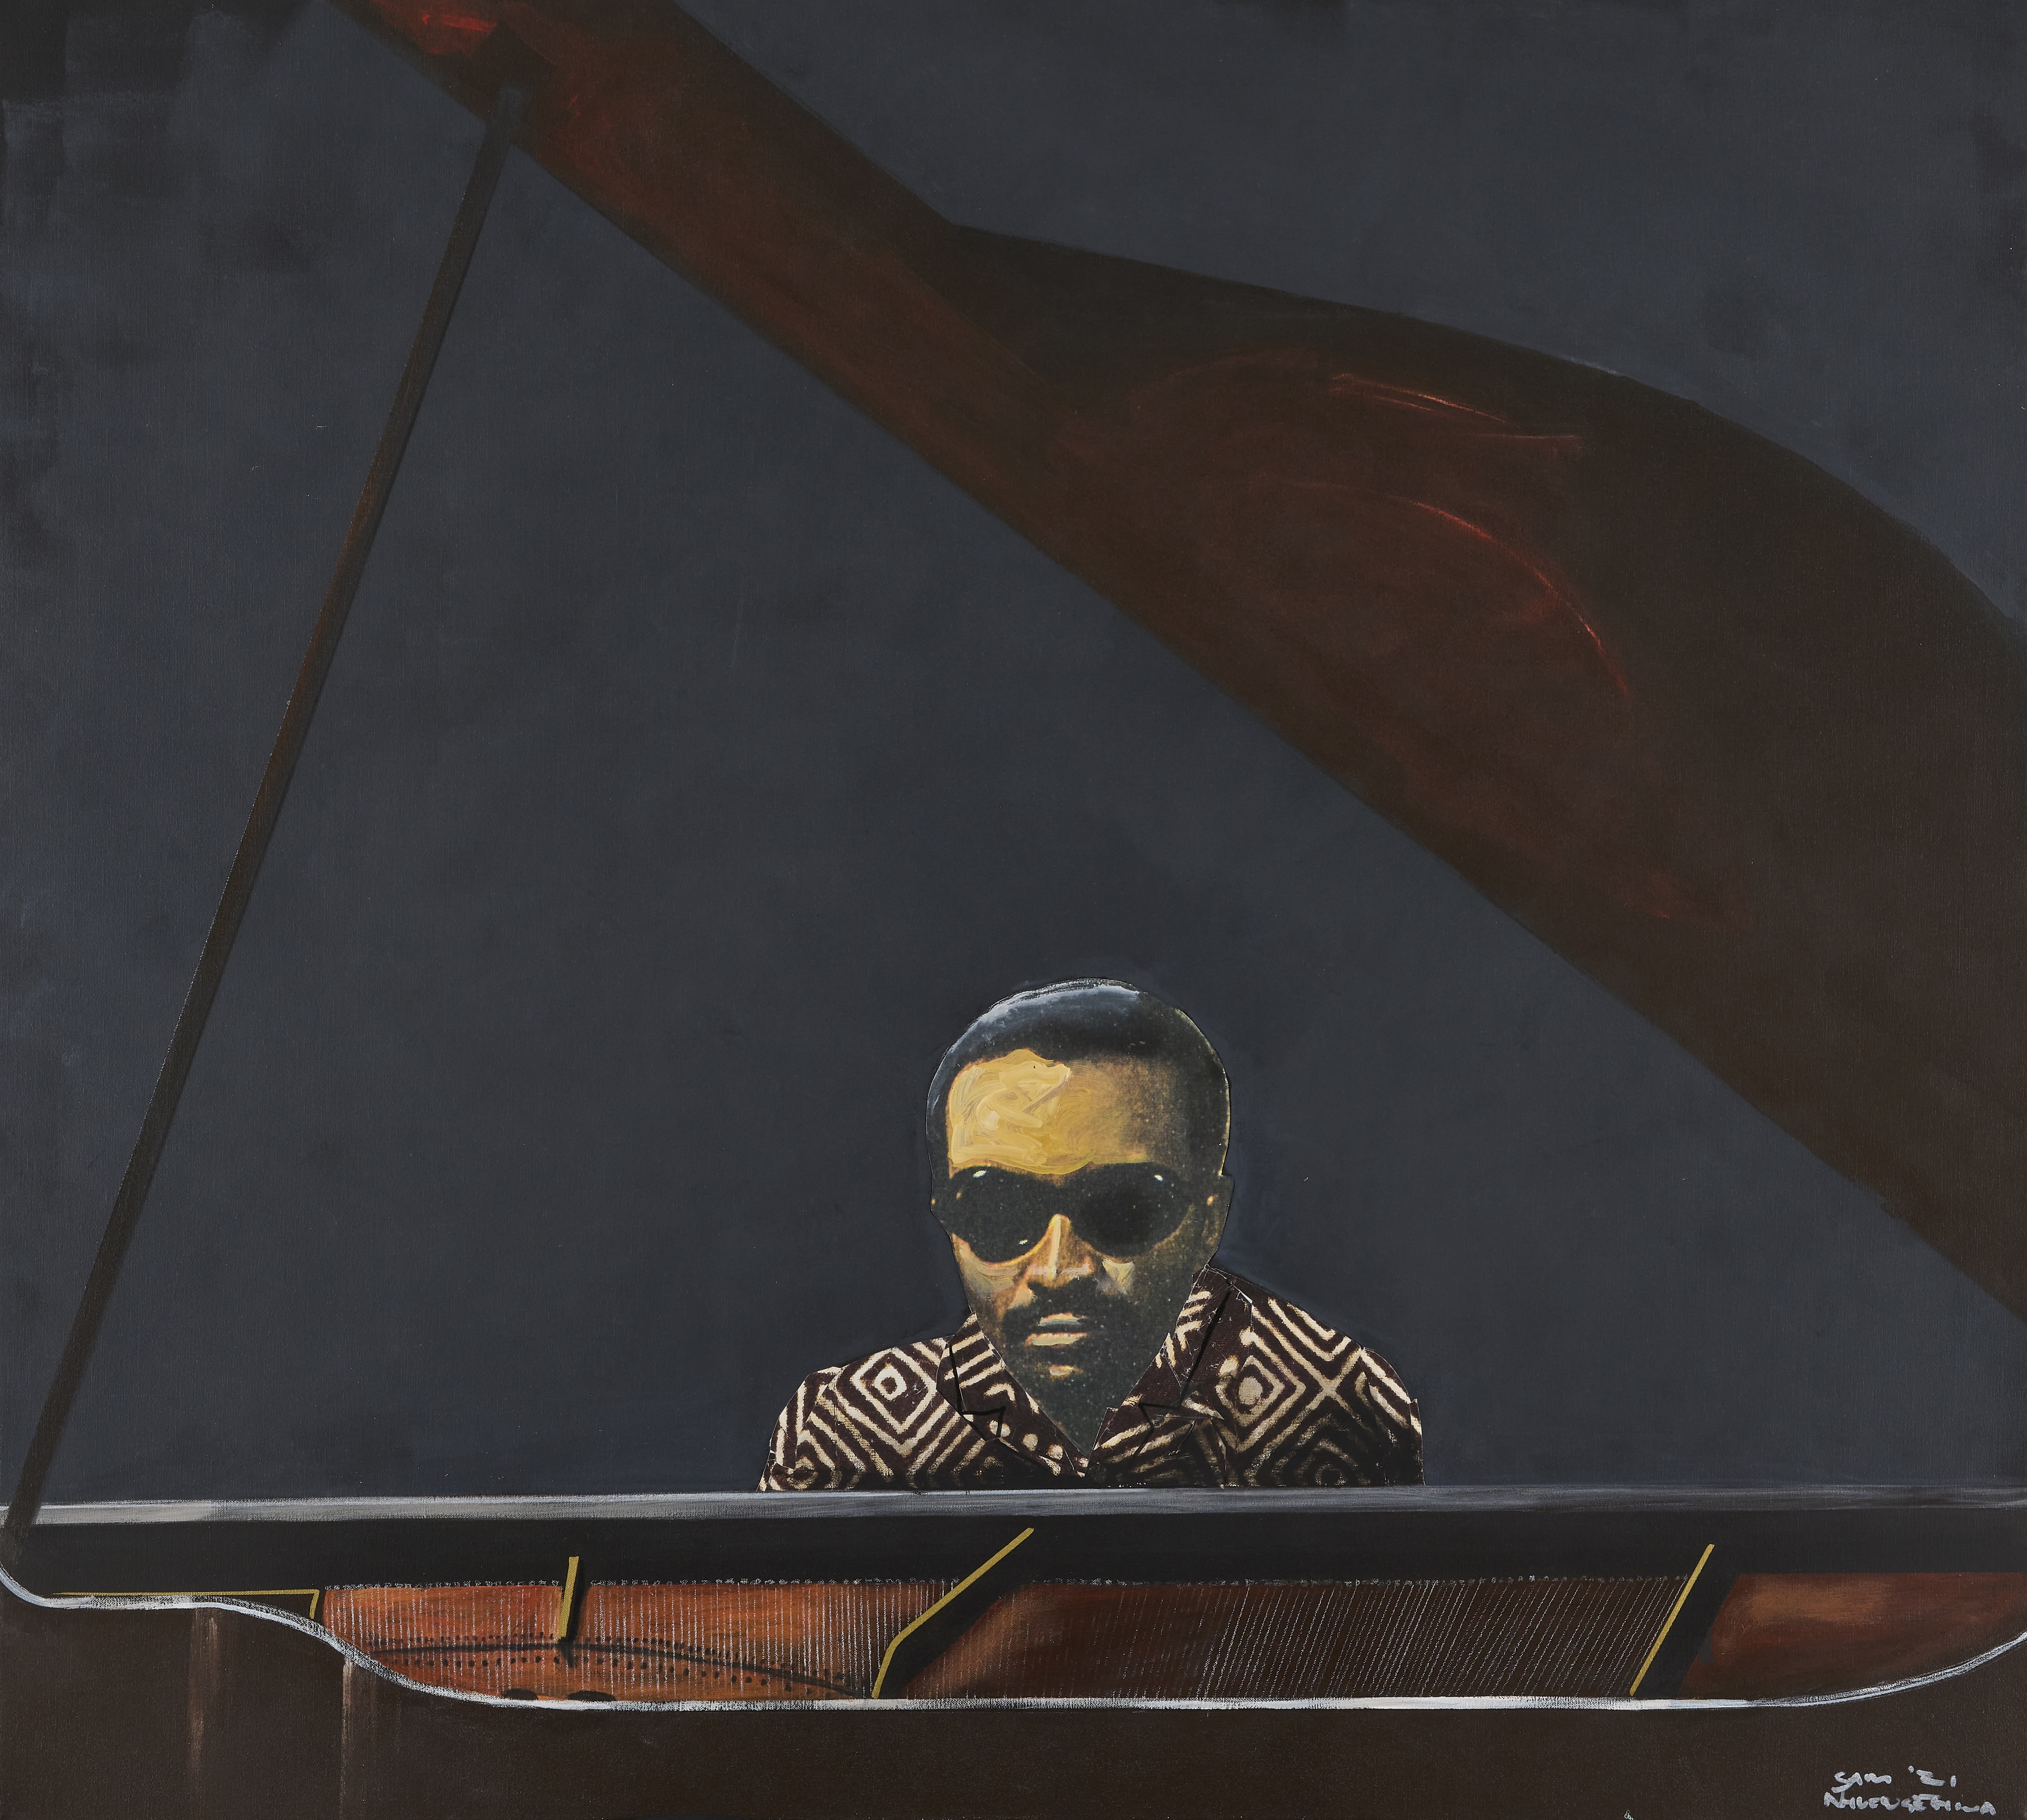 Cecil Taylor, 2021&amp;nbsp;

Mixed media on canvas

90.5 x 100.5 x 10 cm / 35.6 x 39.6 x 4 in.

Enquire